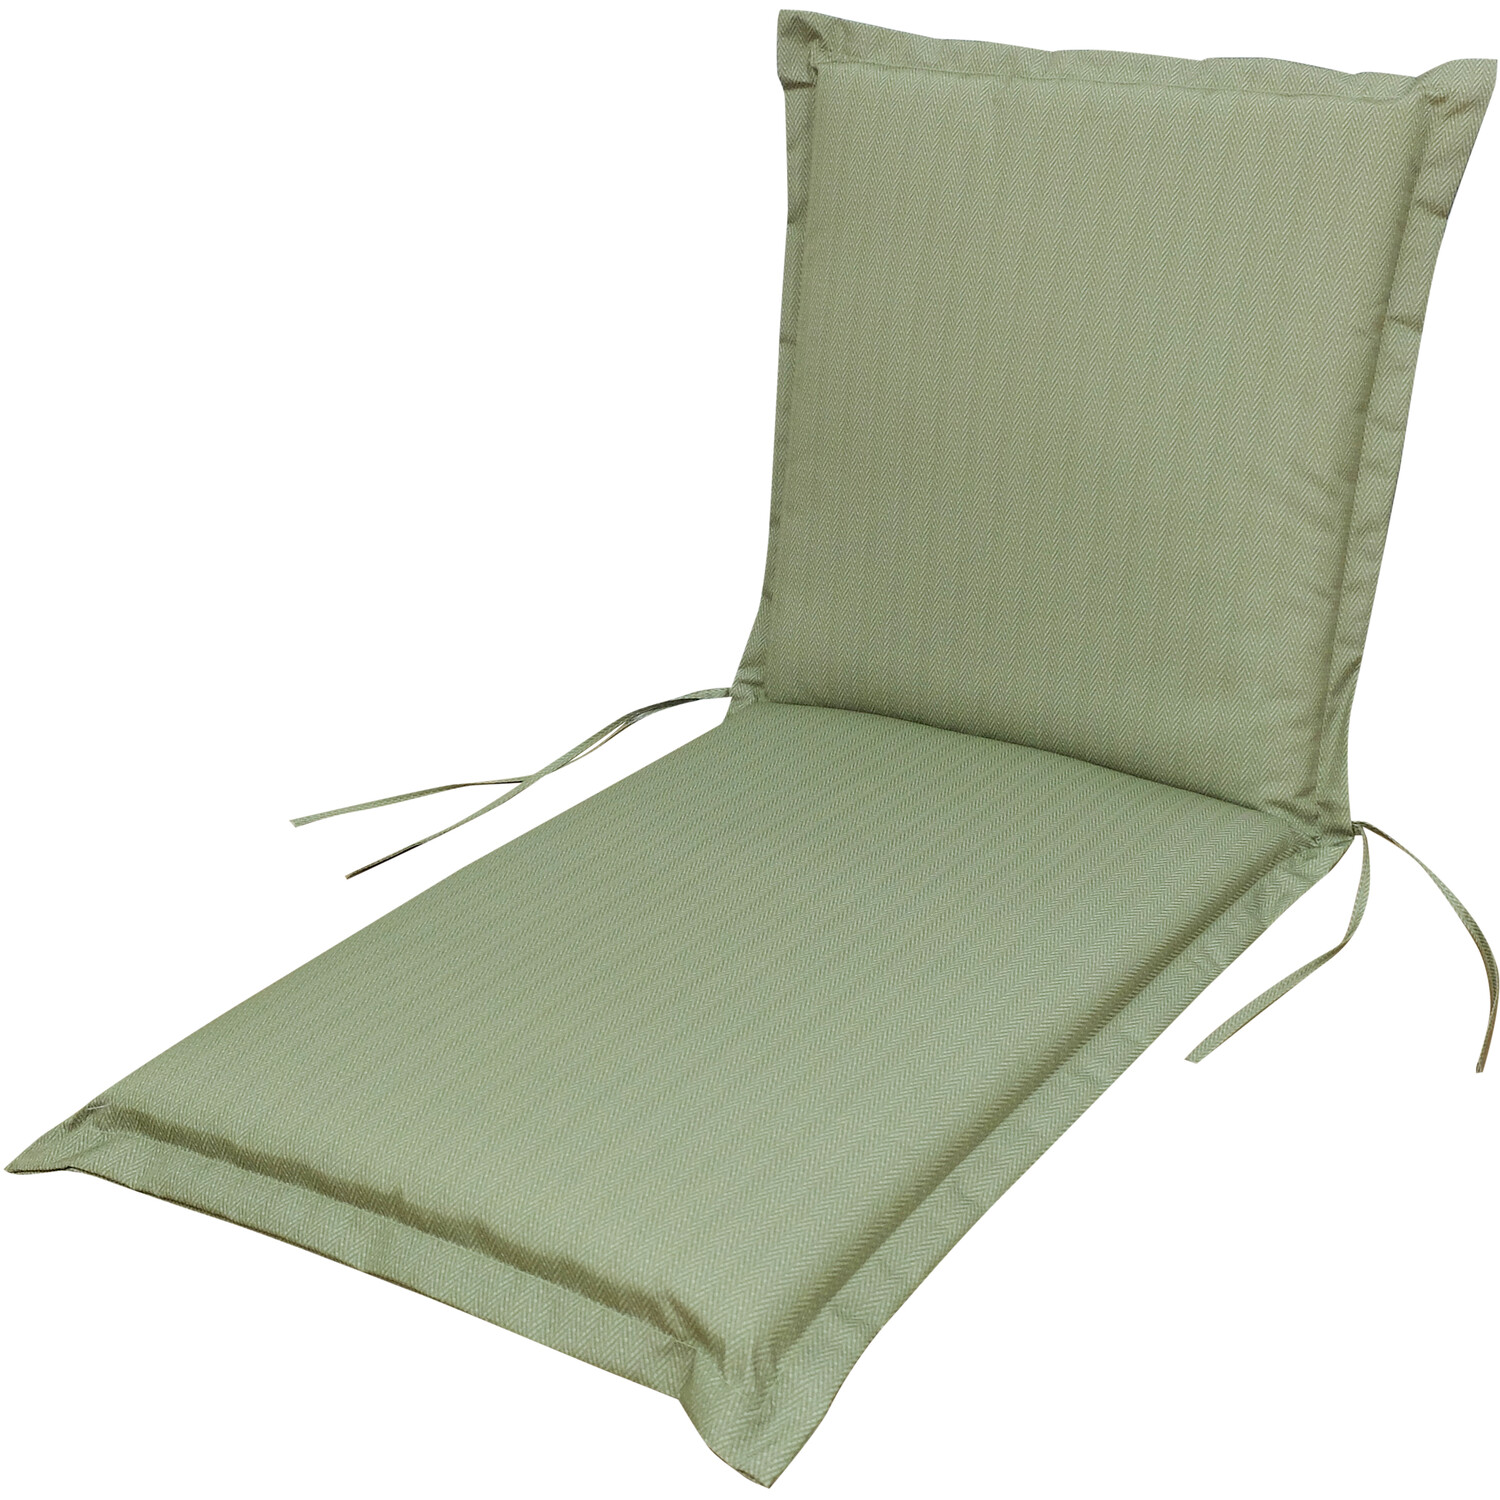 Malay Pack of 2 Multi Position Cushions - Green Image